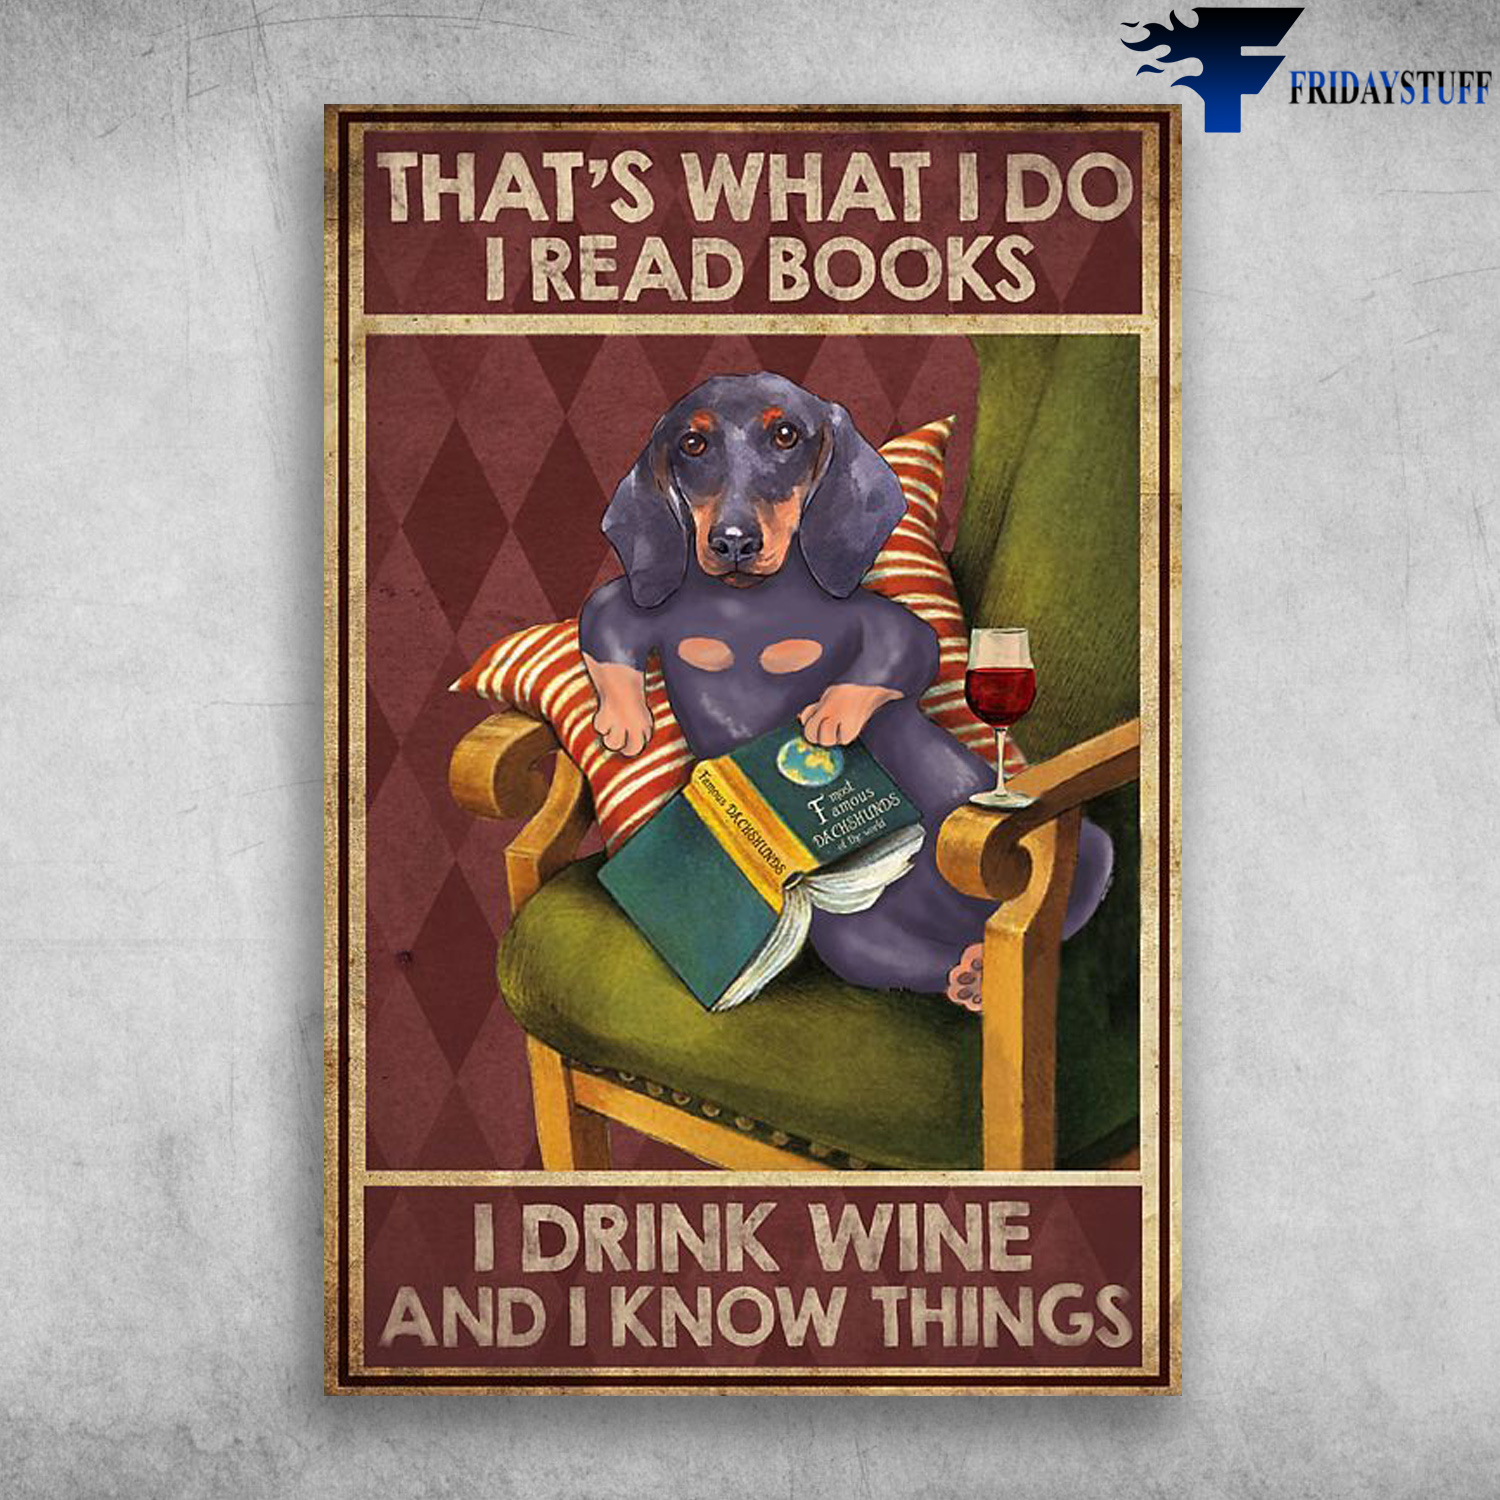 Dachshund Read Book Drink Wine - That's What I Do, I Read Books, I Drink Wine And I Know Things